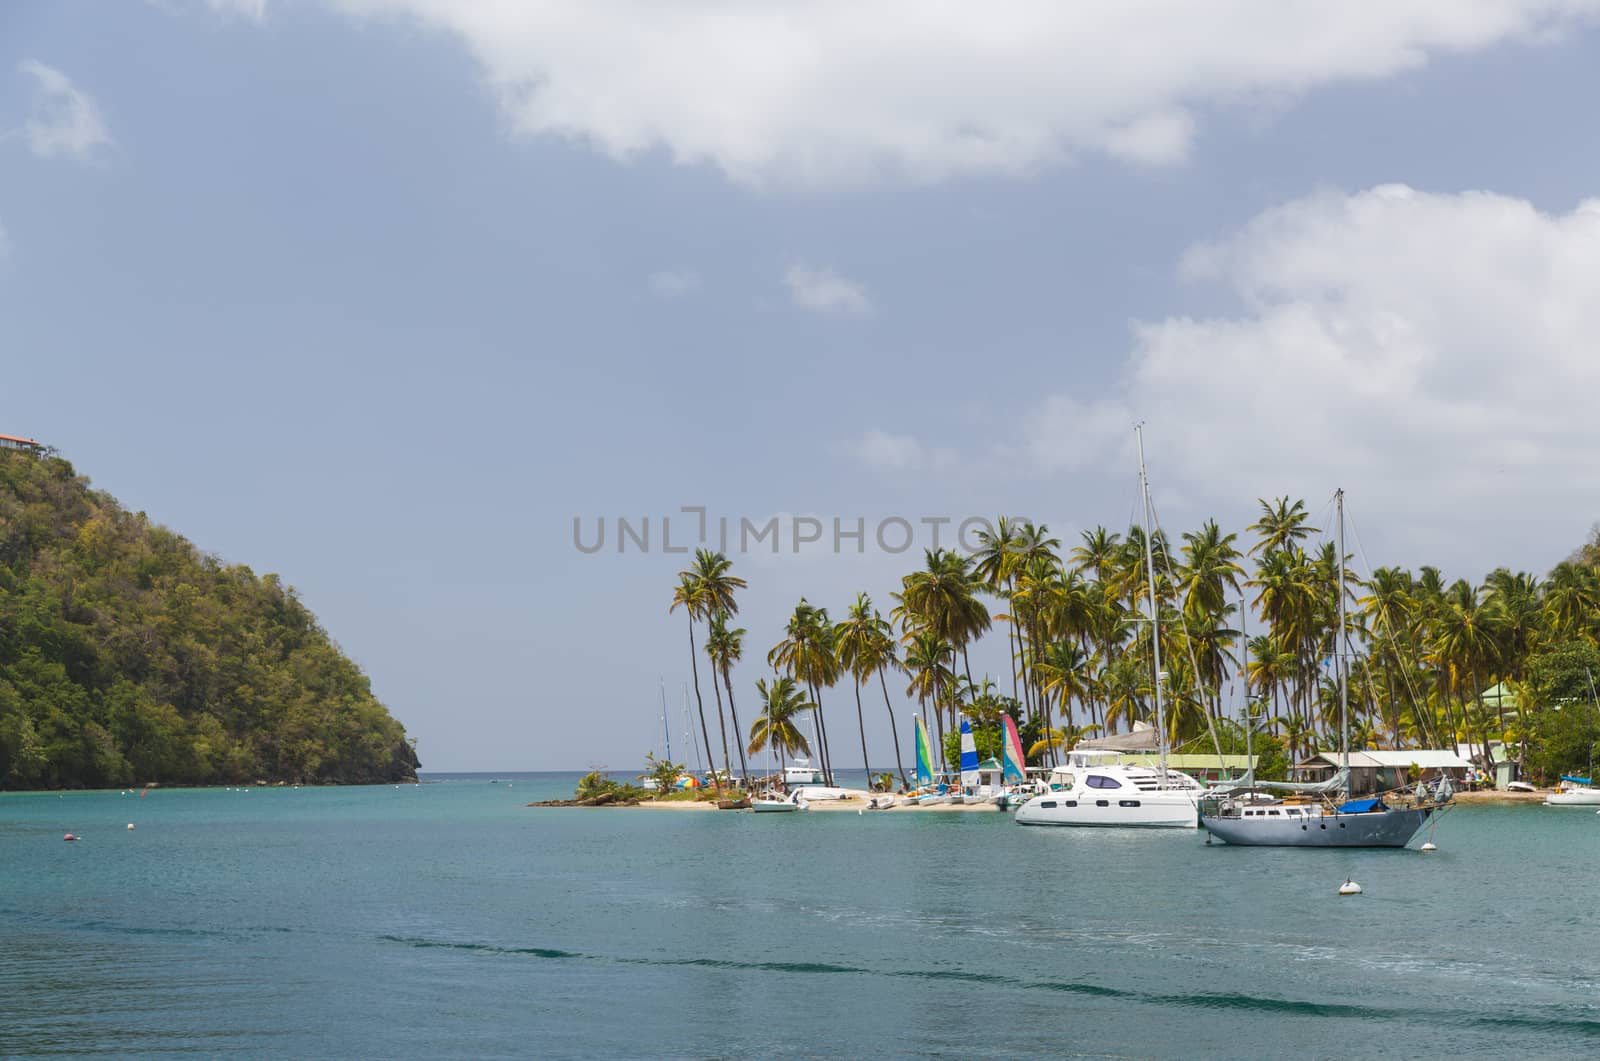 Calm bay in St Lucia by chrisukphoto